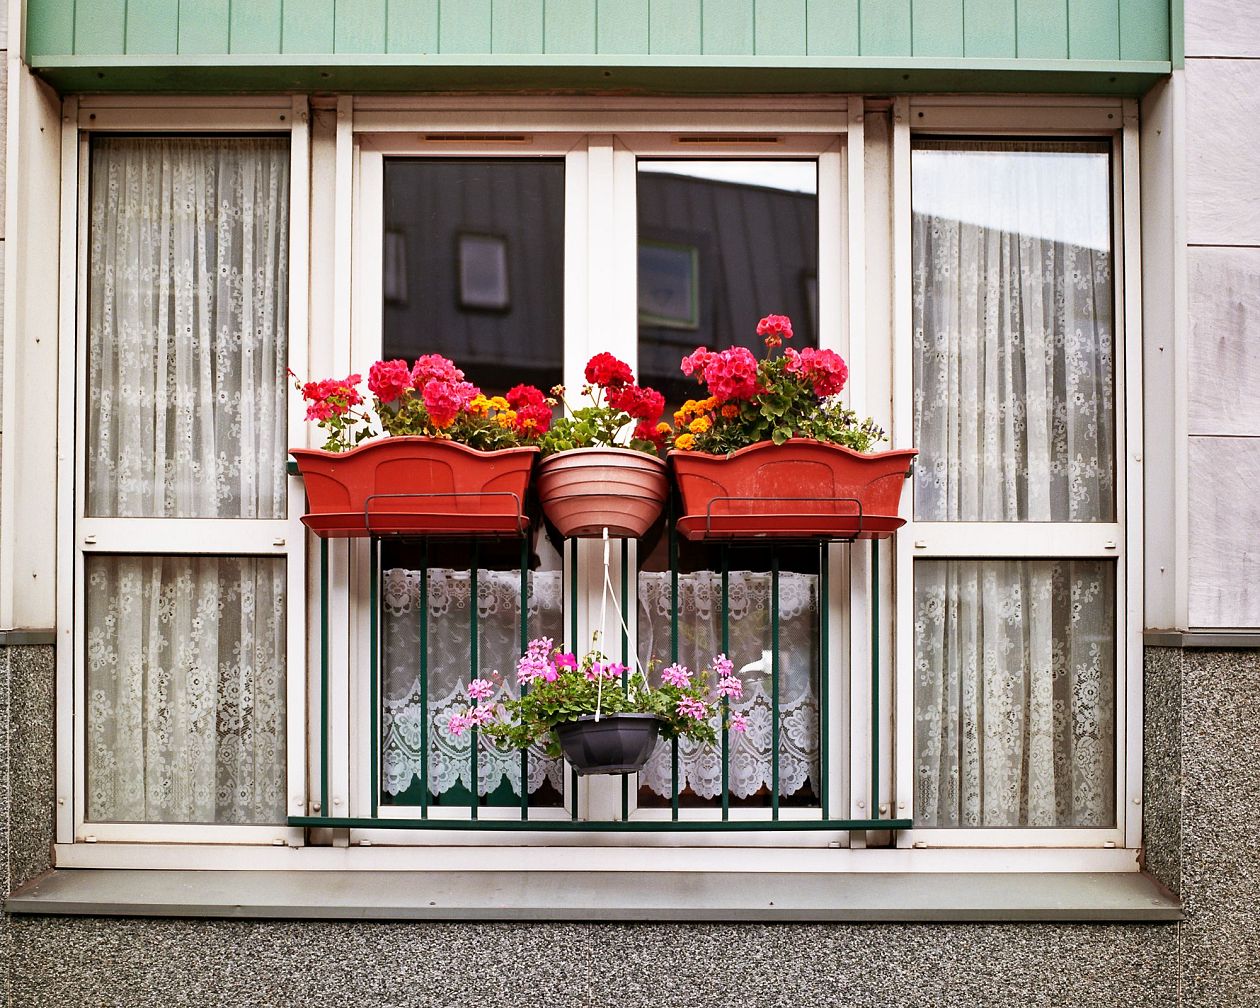 Flowers in pots on the windowsill of a house in Lille, France